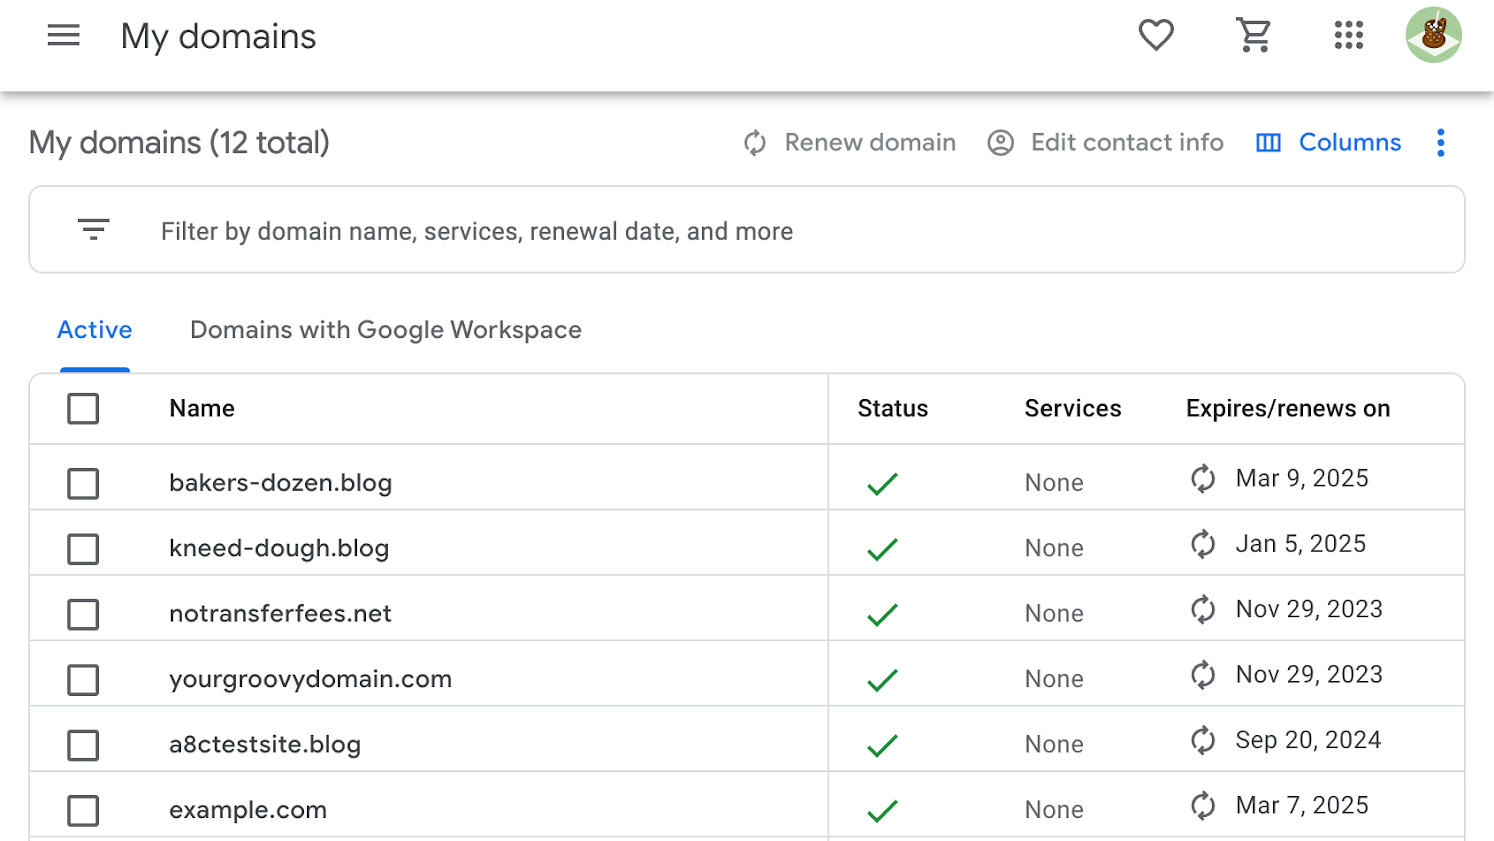 Screenshot of a Google Domains account with multiple domains listed.